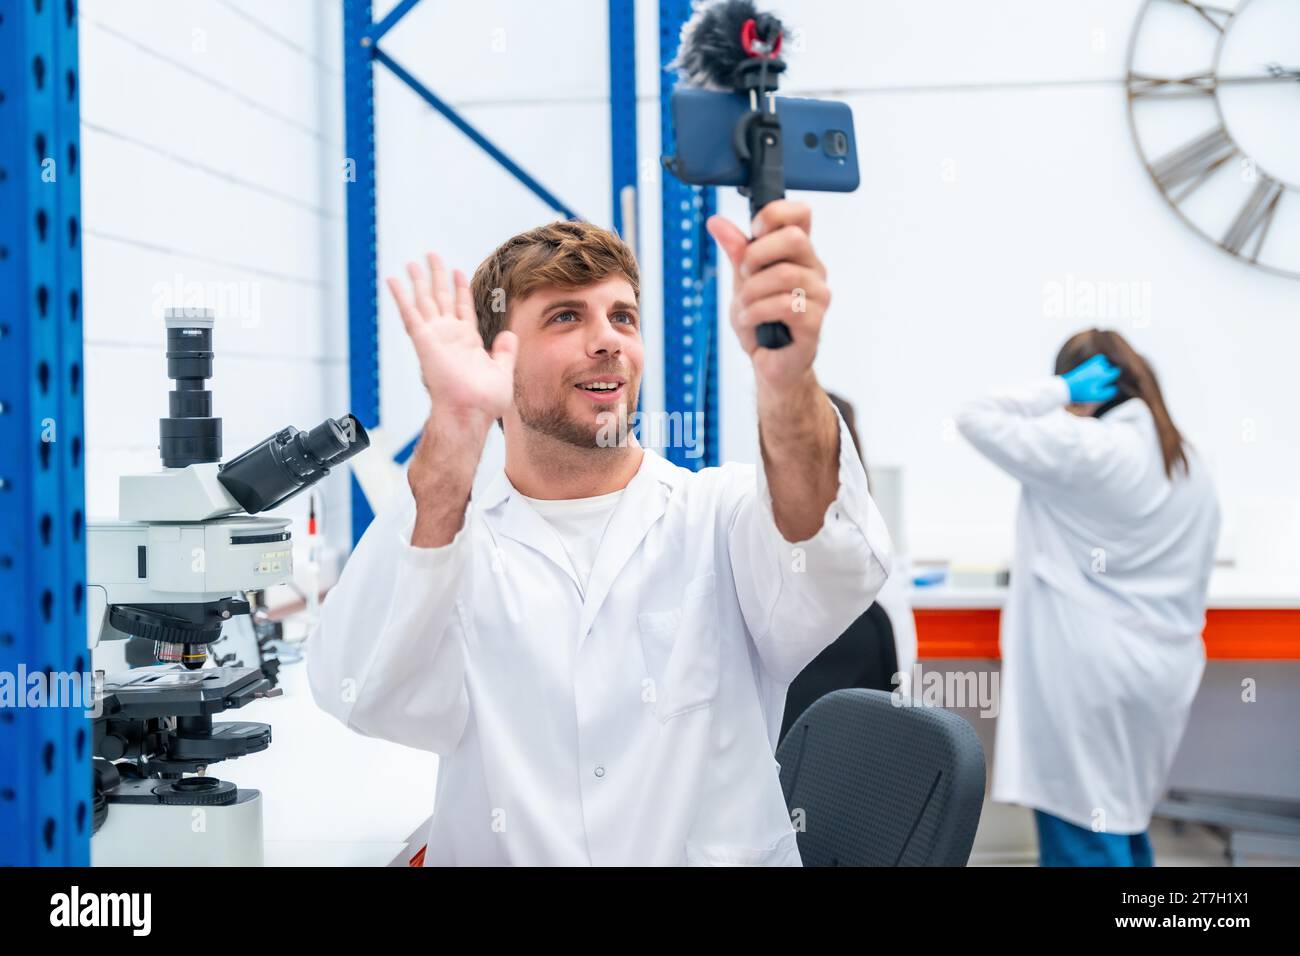 Young handsome scientist waving while broadcasting using phone in a research laboratory Stock Photo